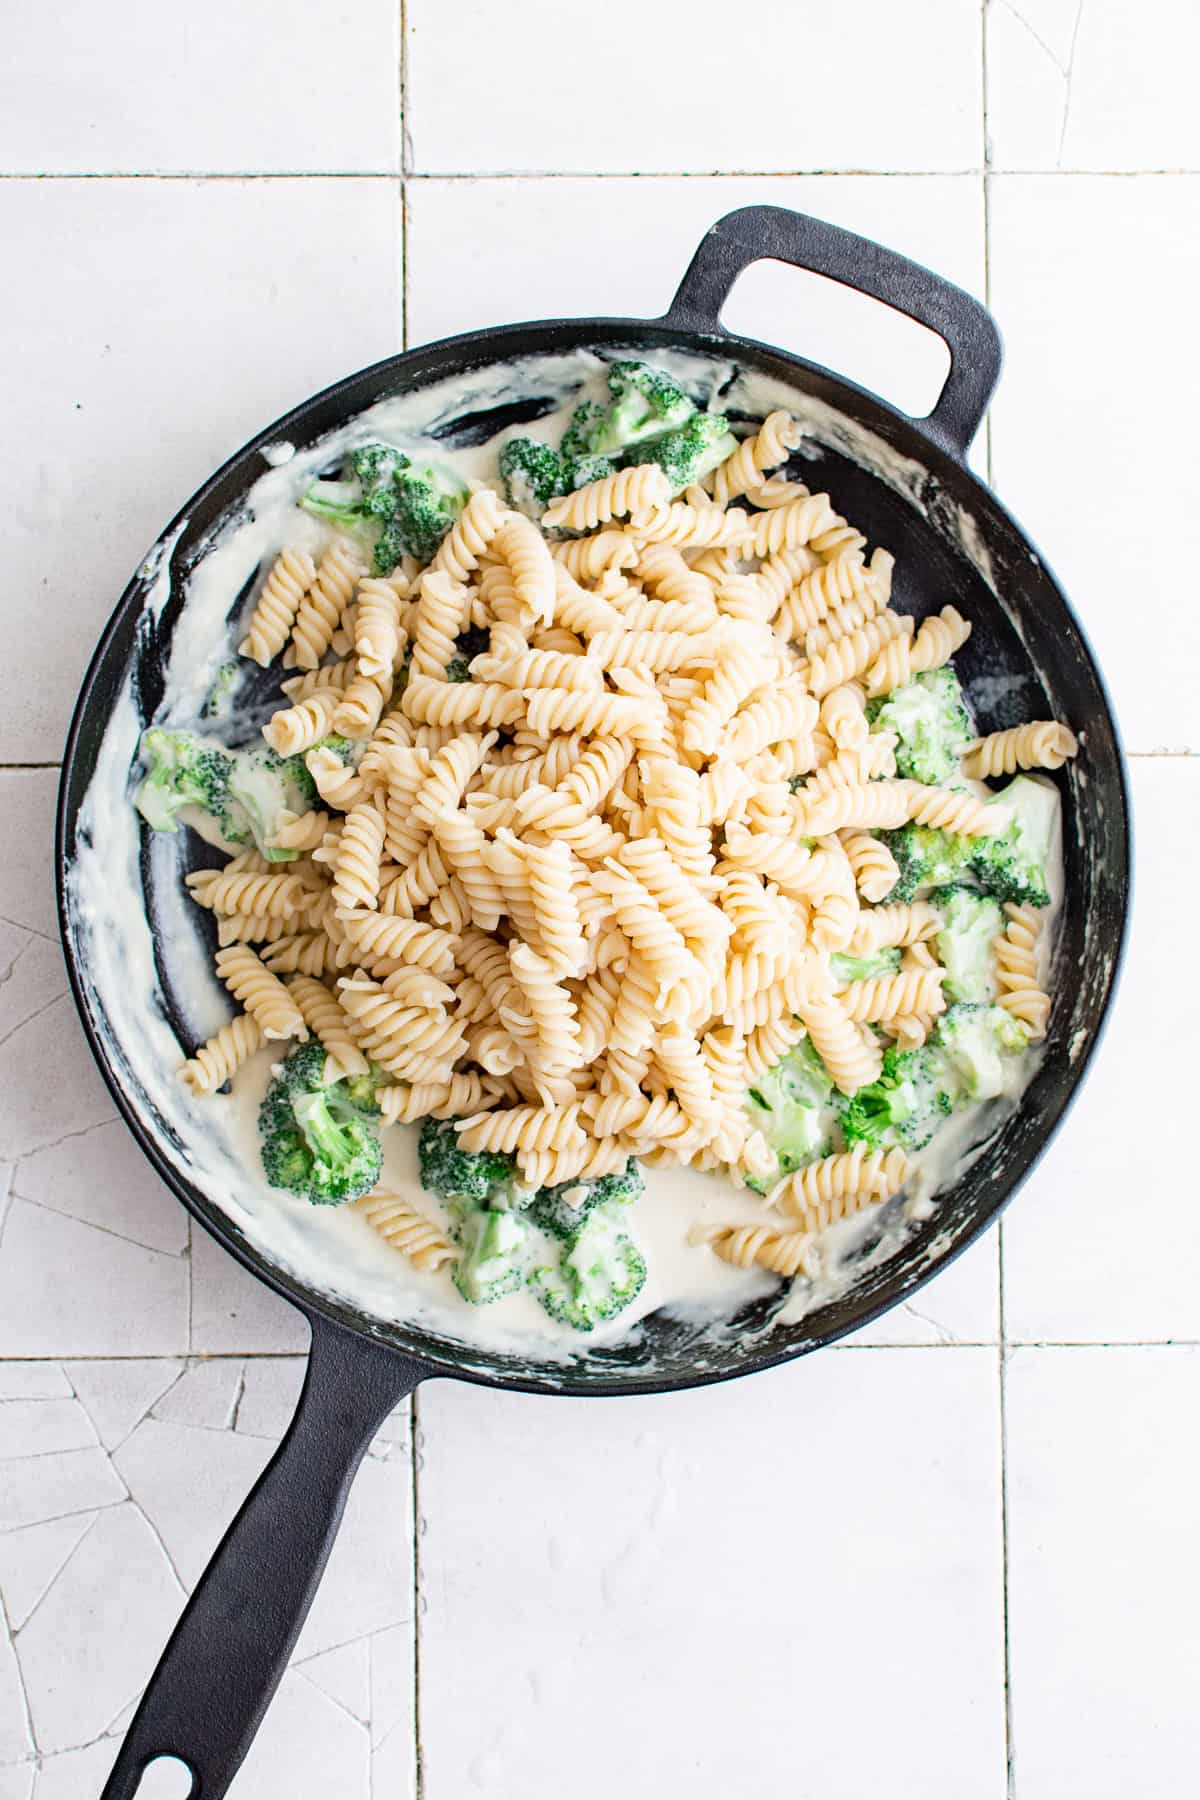 Top down view of pasta noodles on top of cream sauce with broccoli.